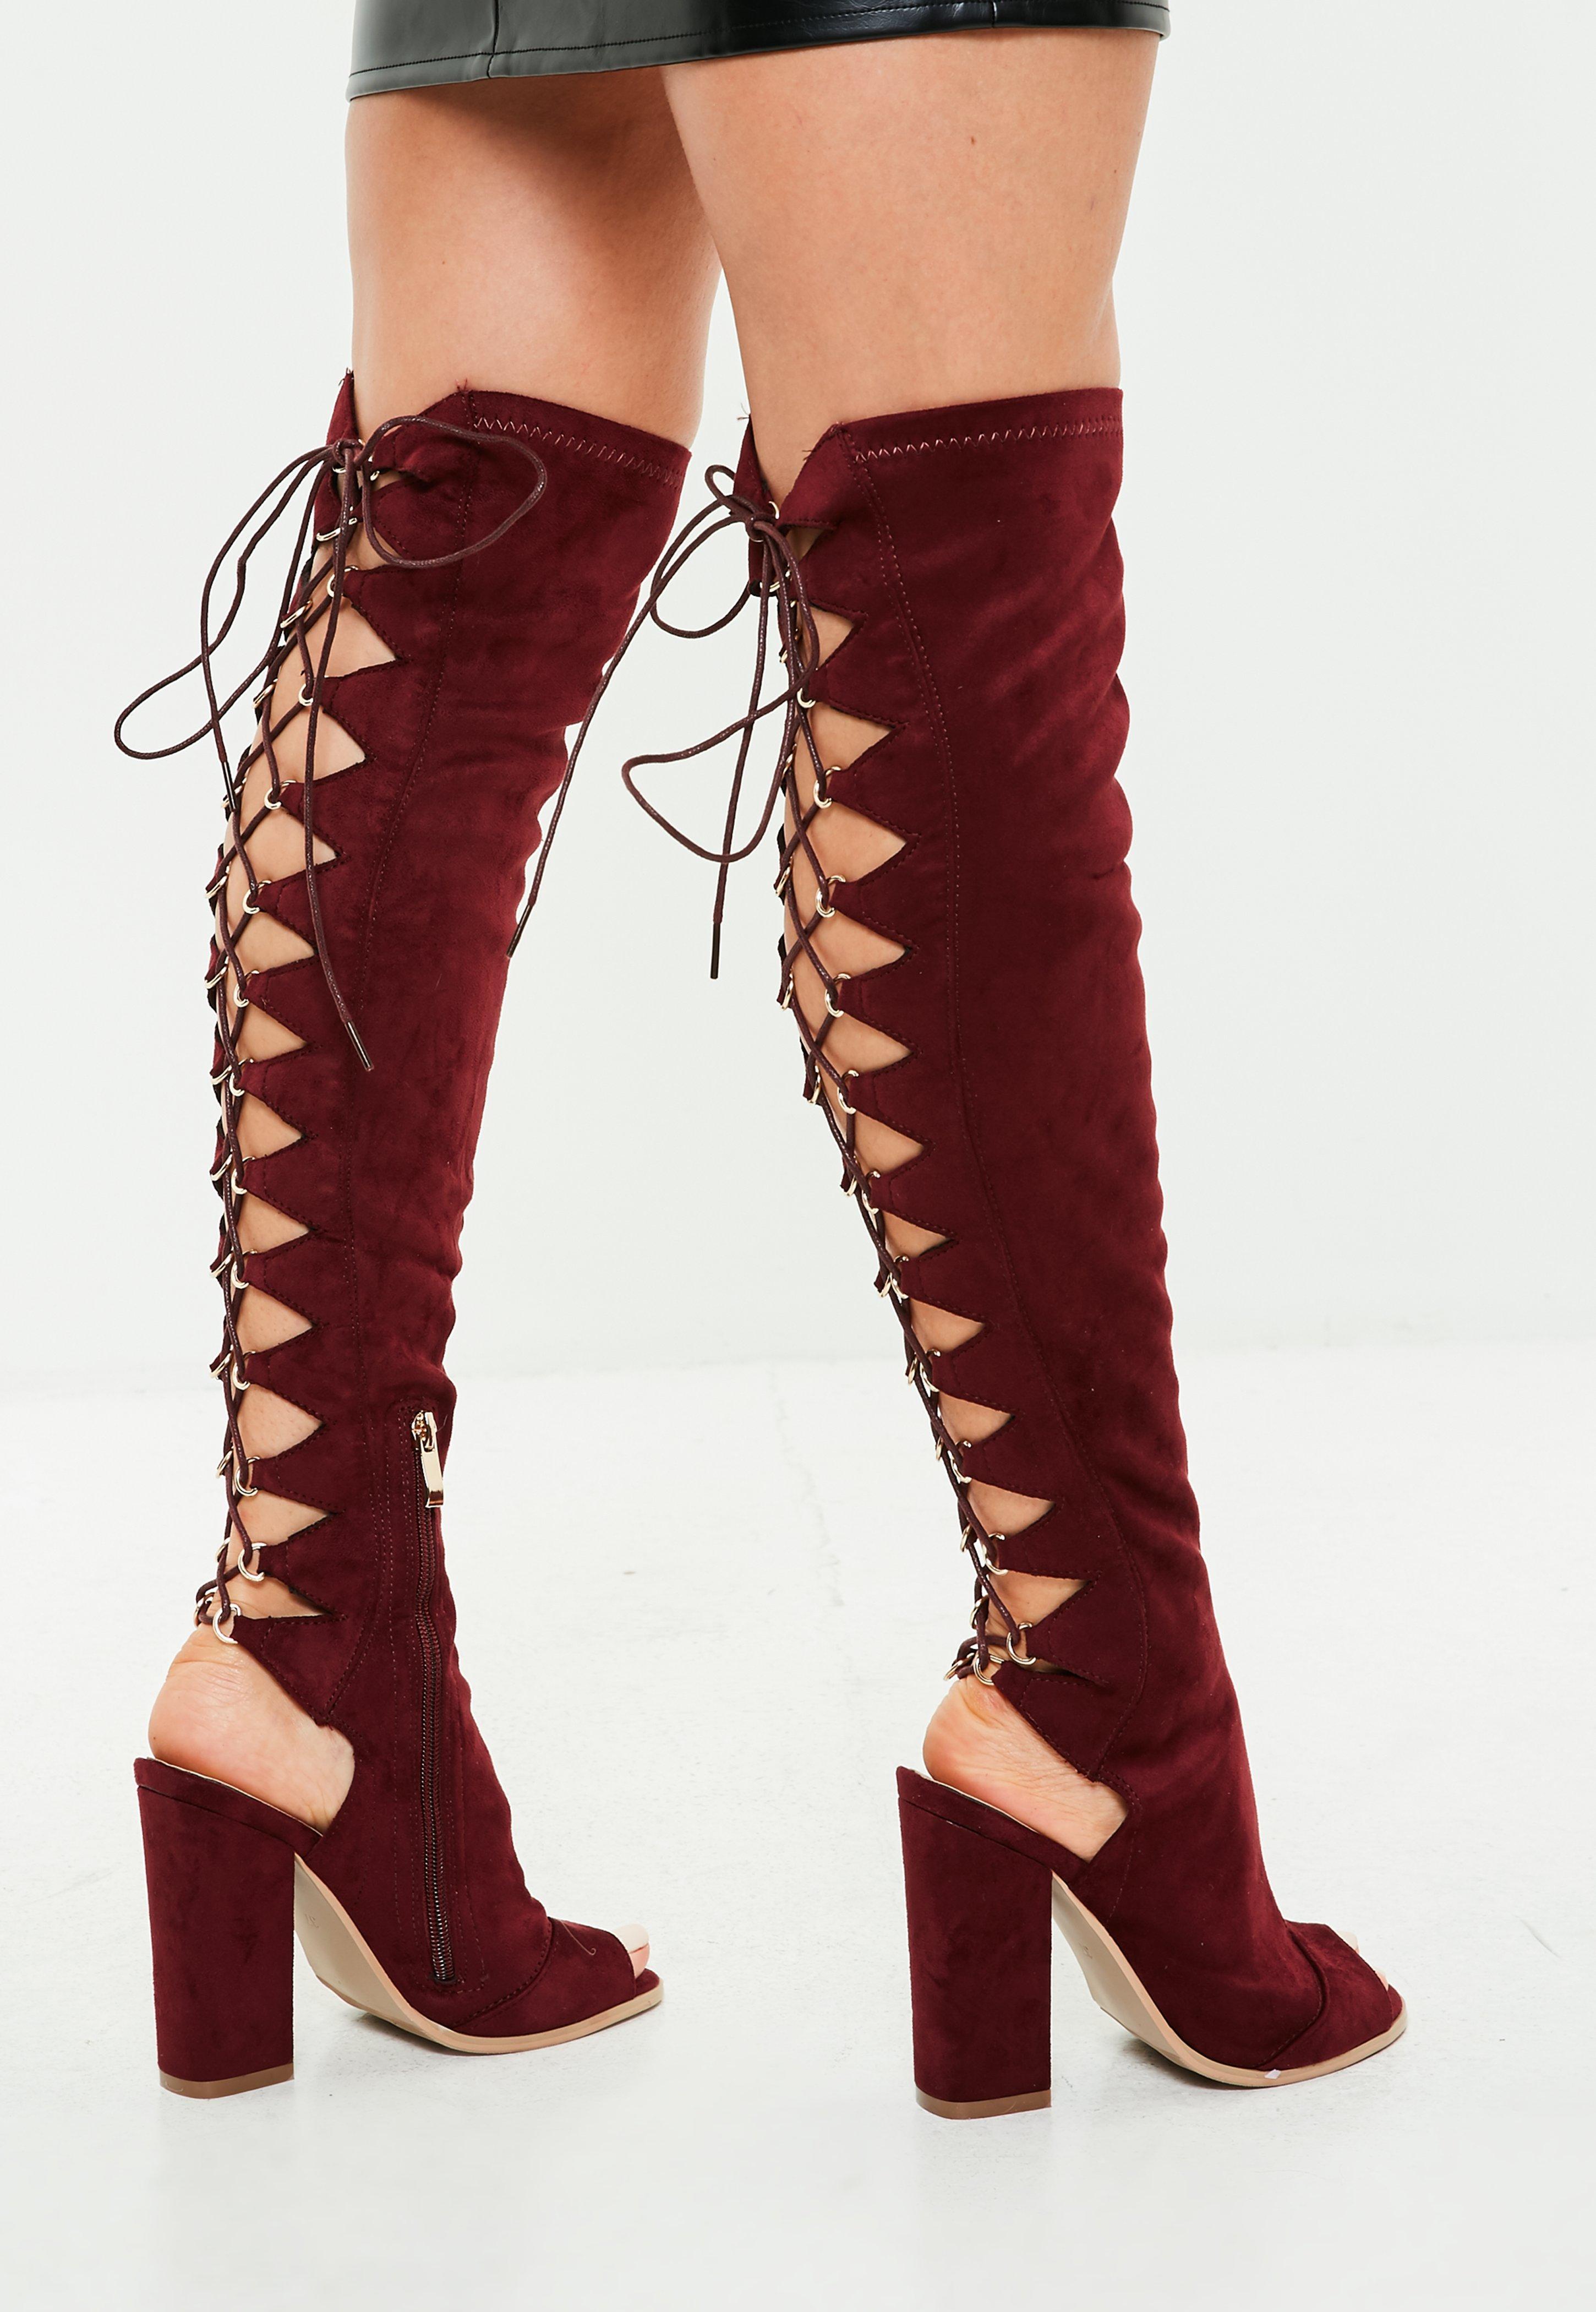 Missguided Burgundy Lace Up Thigh High Boots in Red - Lyst